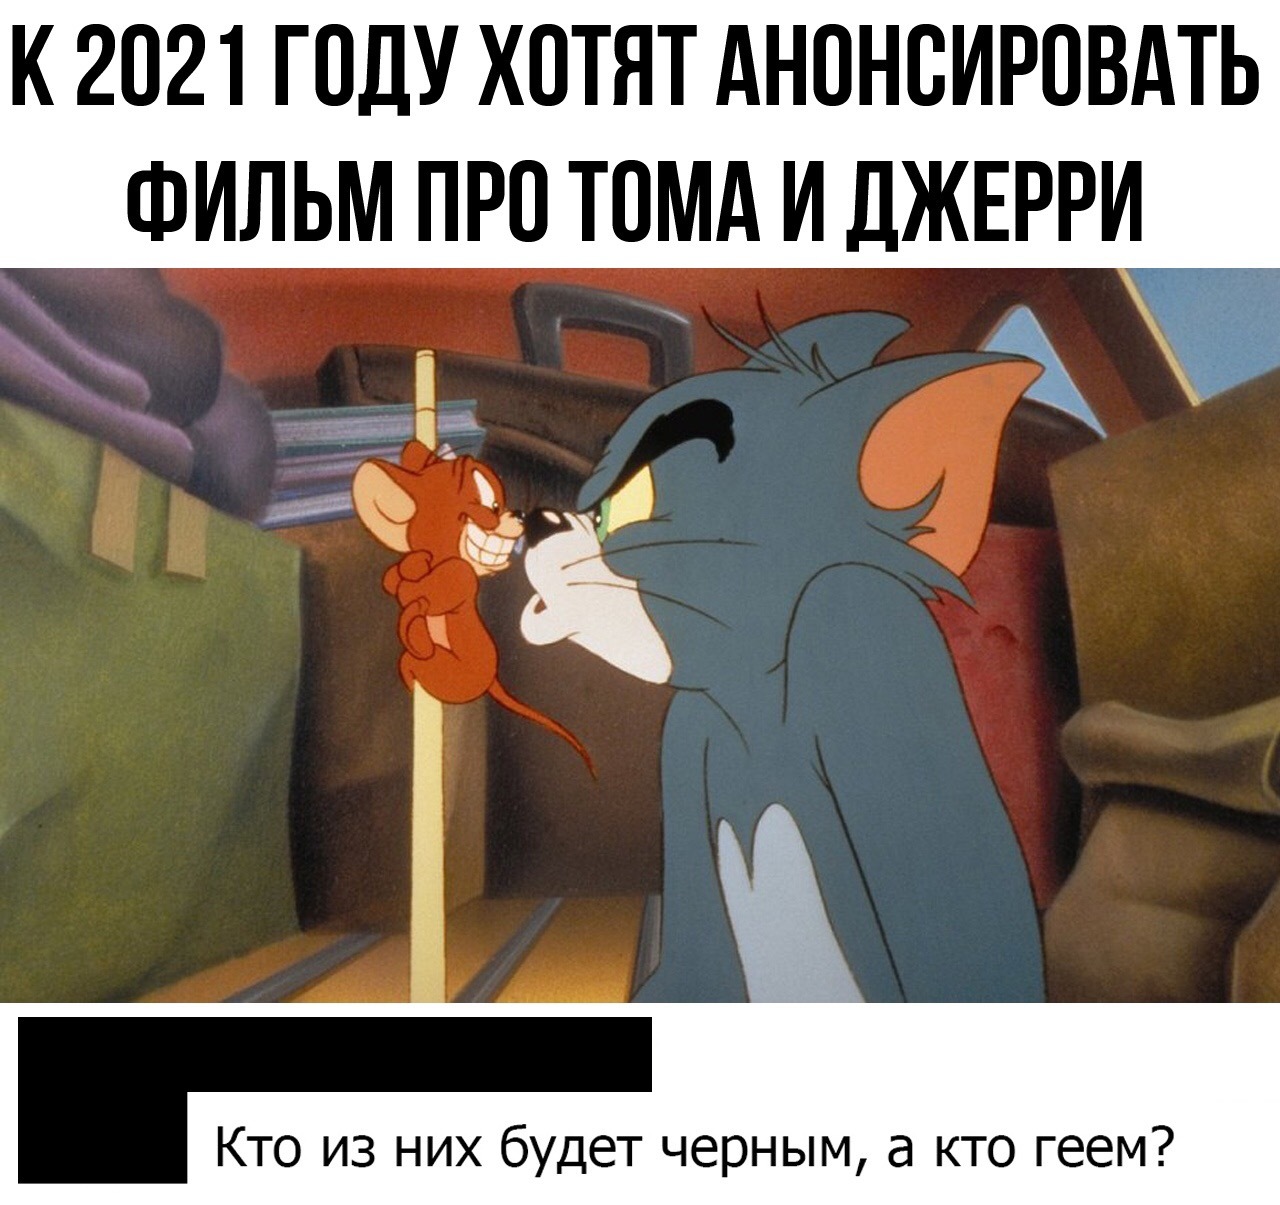 Will it be a love story? - Tom and Jerry, Warner brothers, Movies, Picture with text